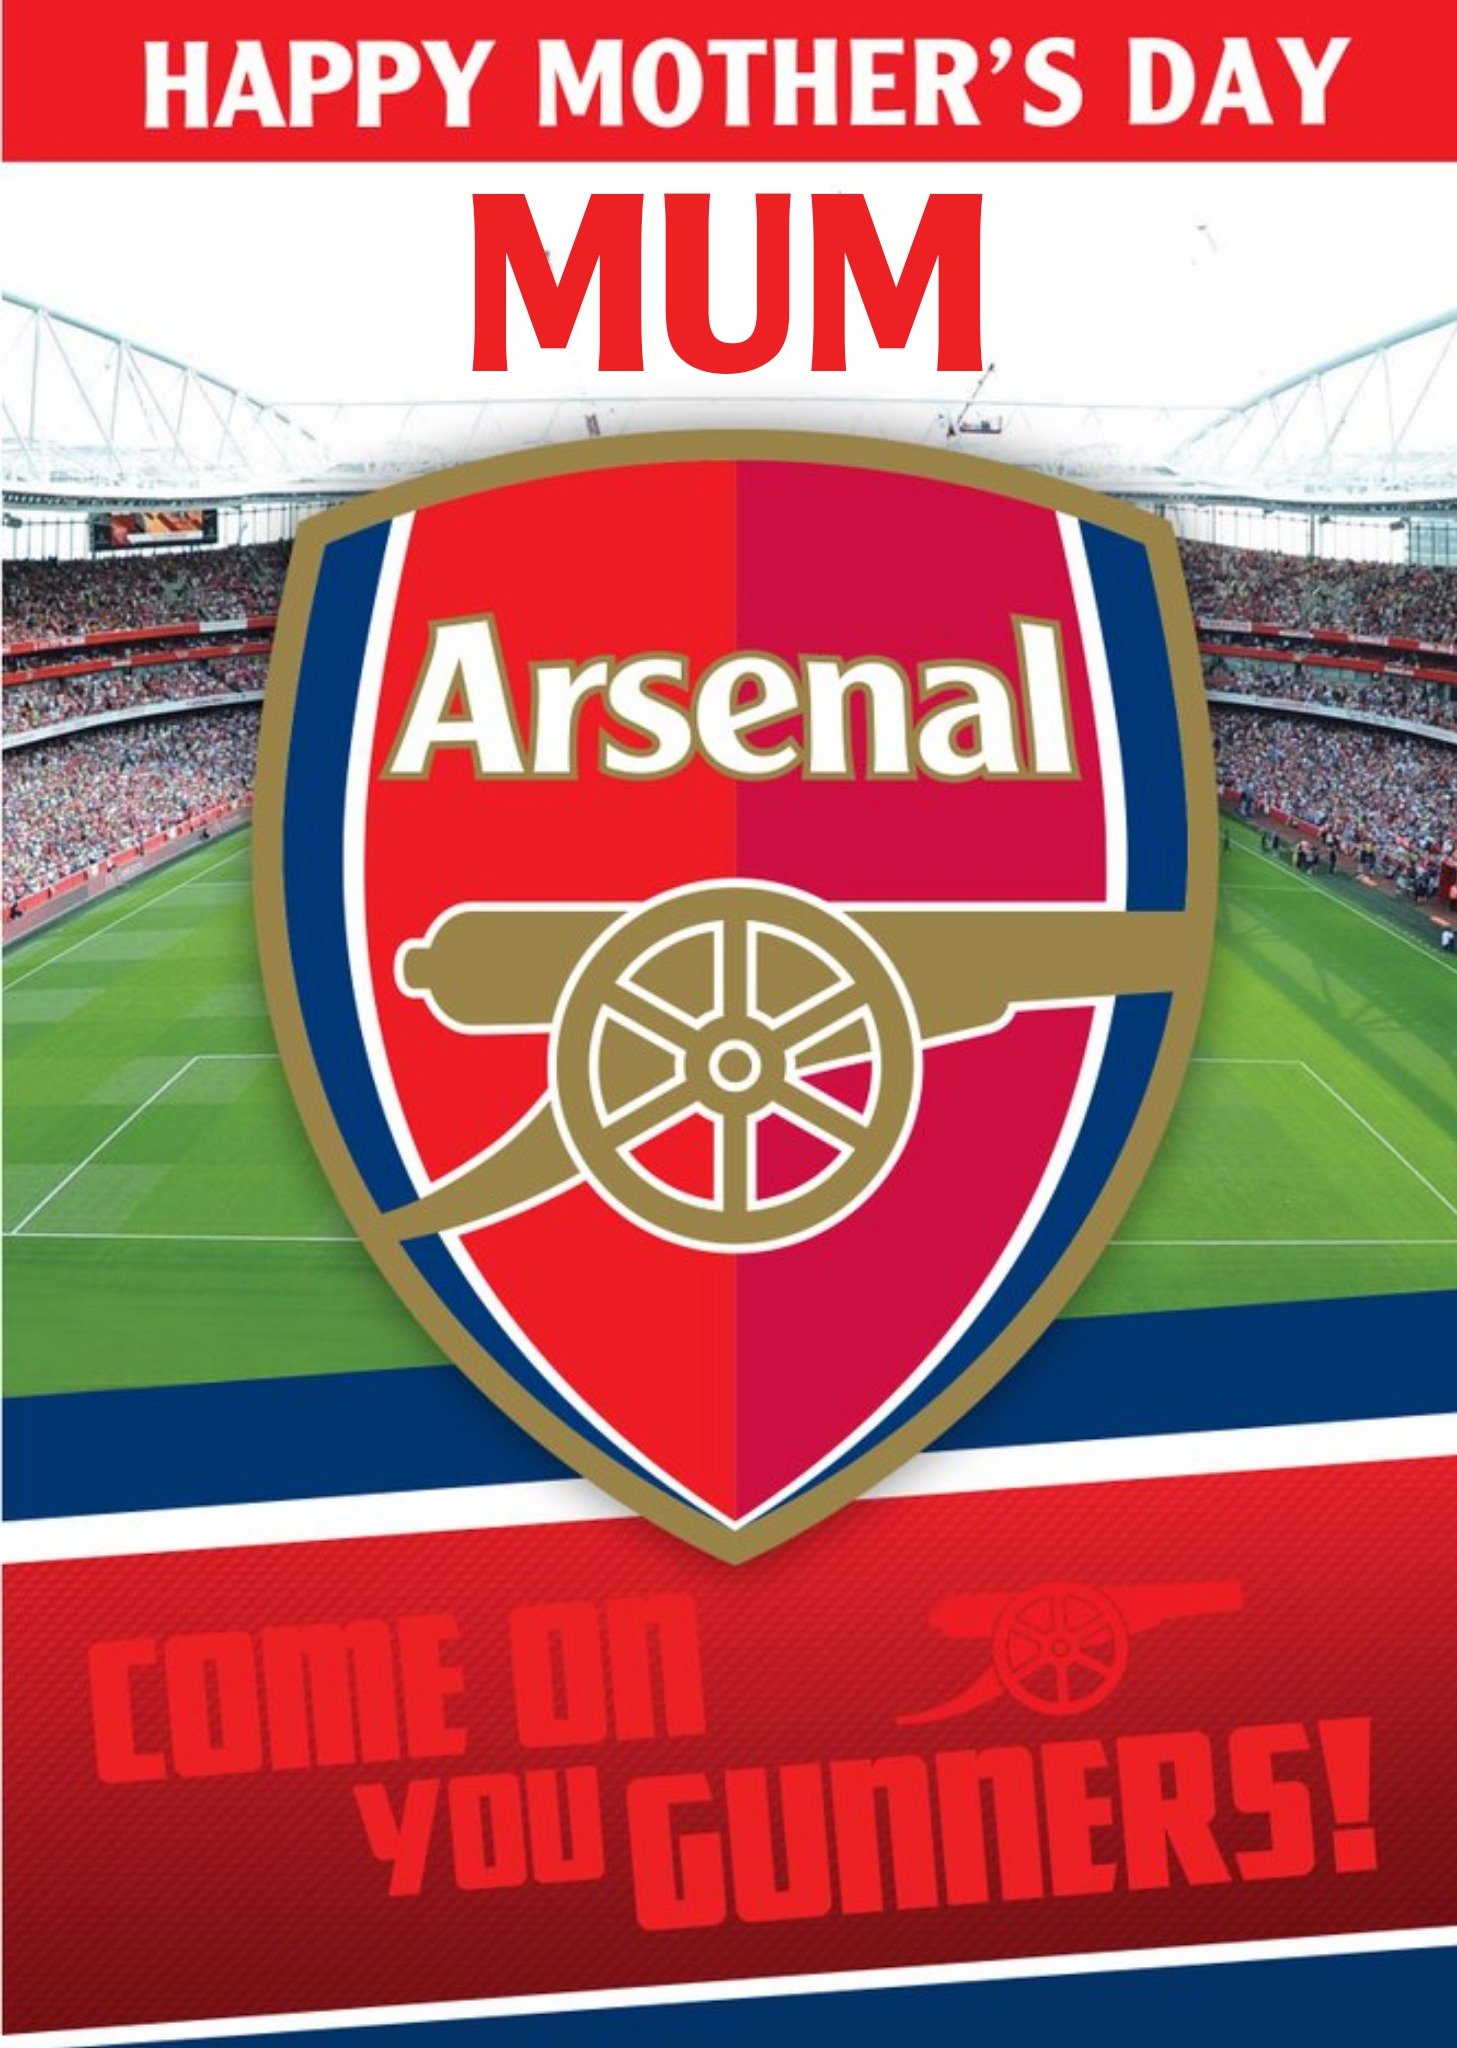 Arsenal Football Stadium Come On You Gunners Mother's Day Card, Large